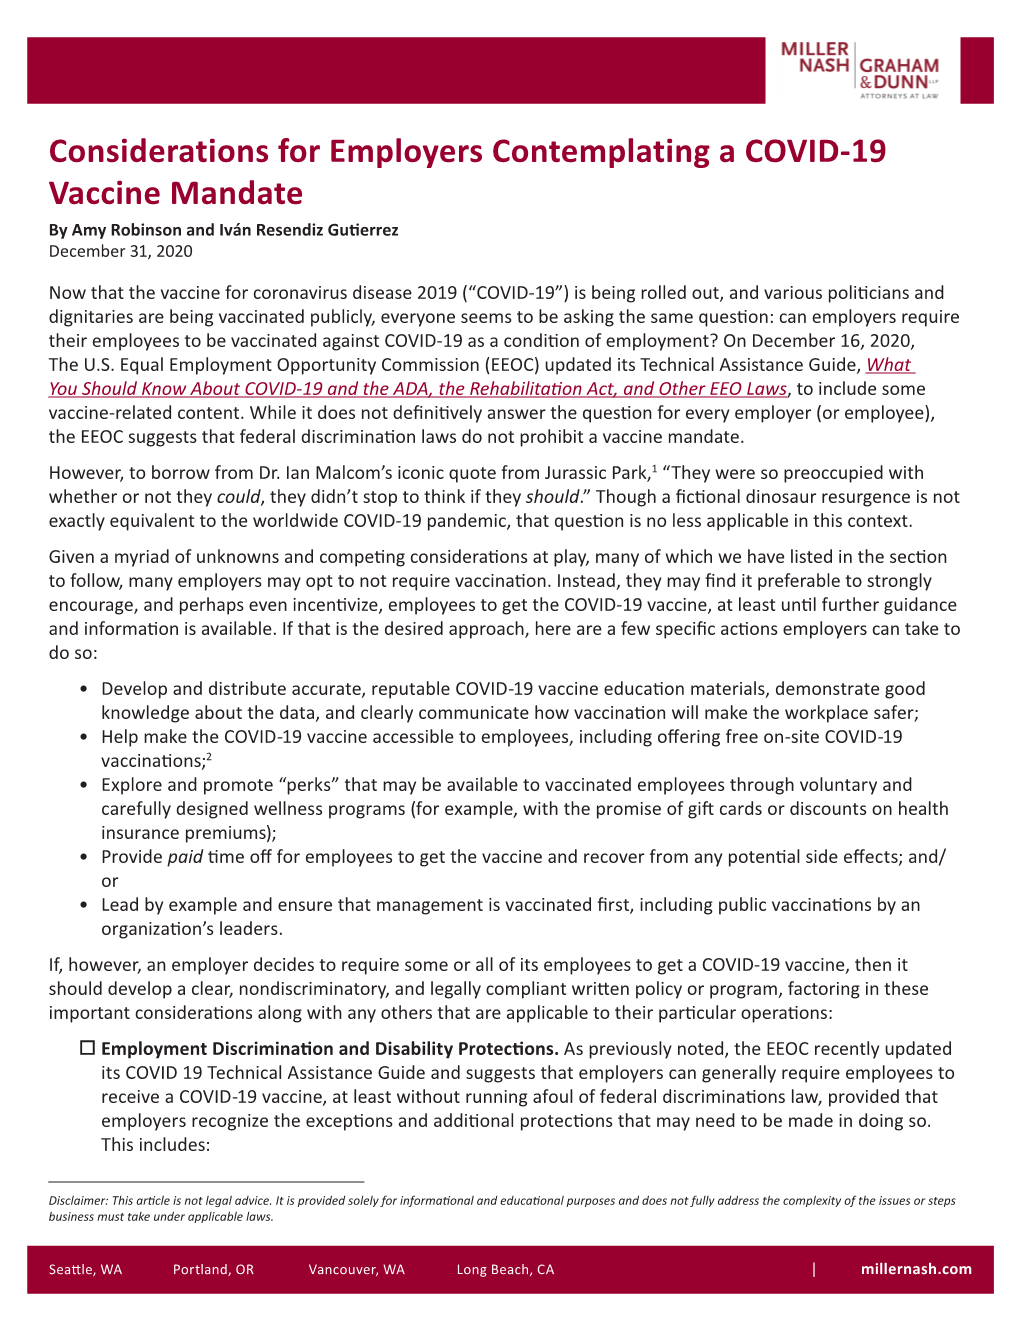 Considerations for Employers Contemplating a COVID-19 Vaccine Mandate by Amy Robinson and Iván Resendiz Gutierrez December 31, 2020